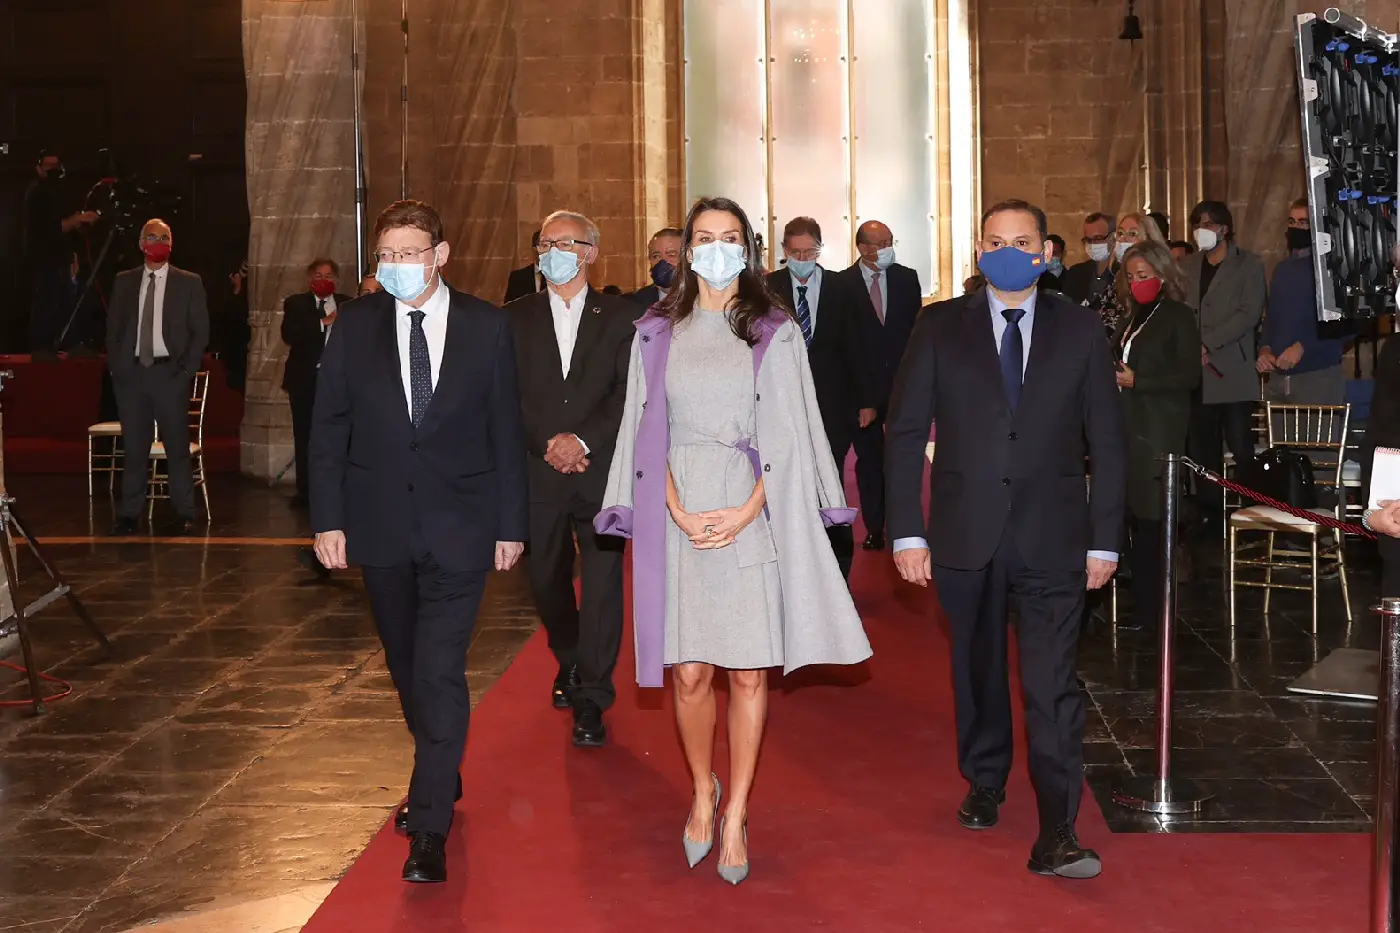 Queen Letizia of Spain travelled to Valencia for King Jaime I Awards